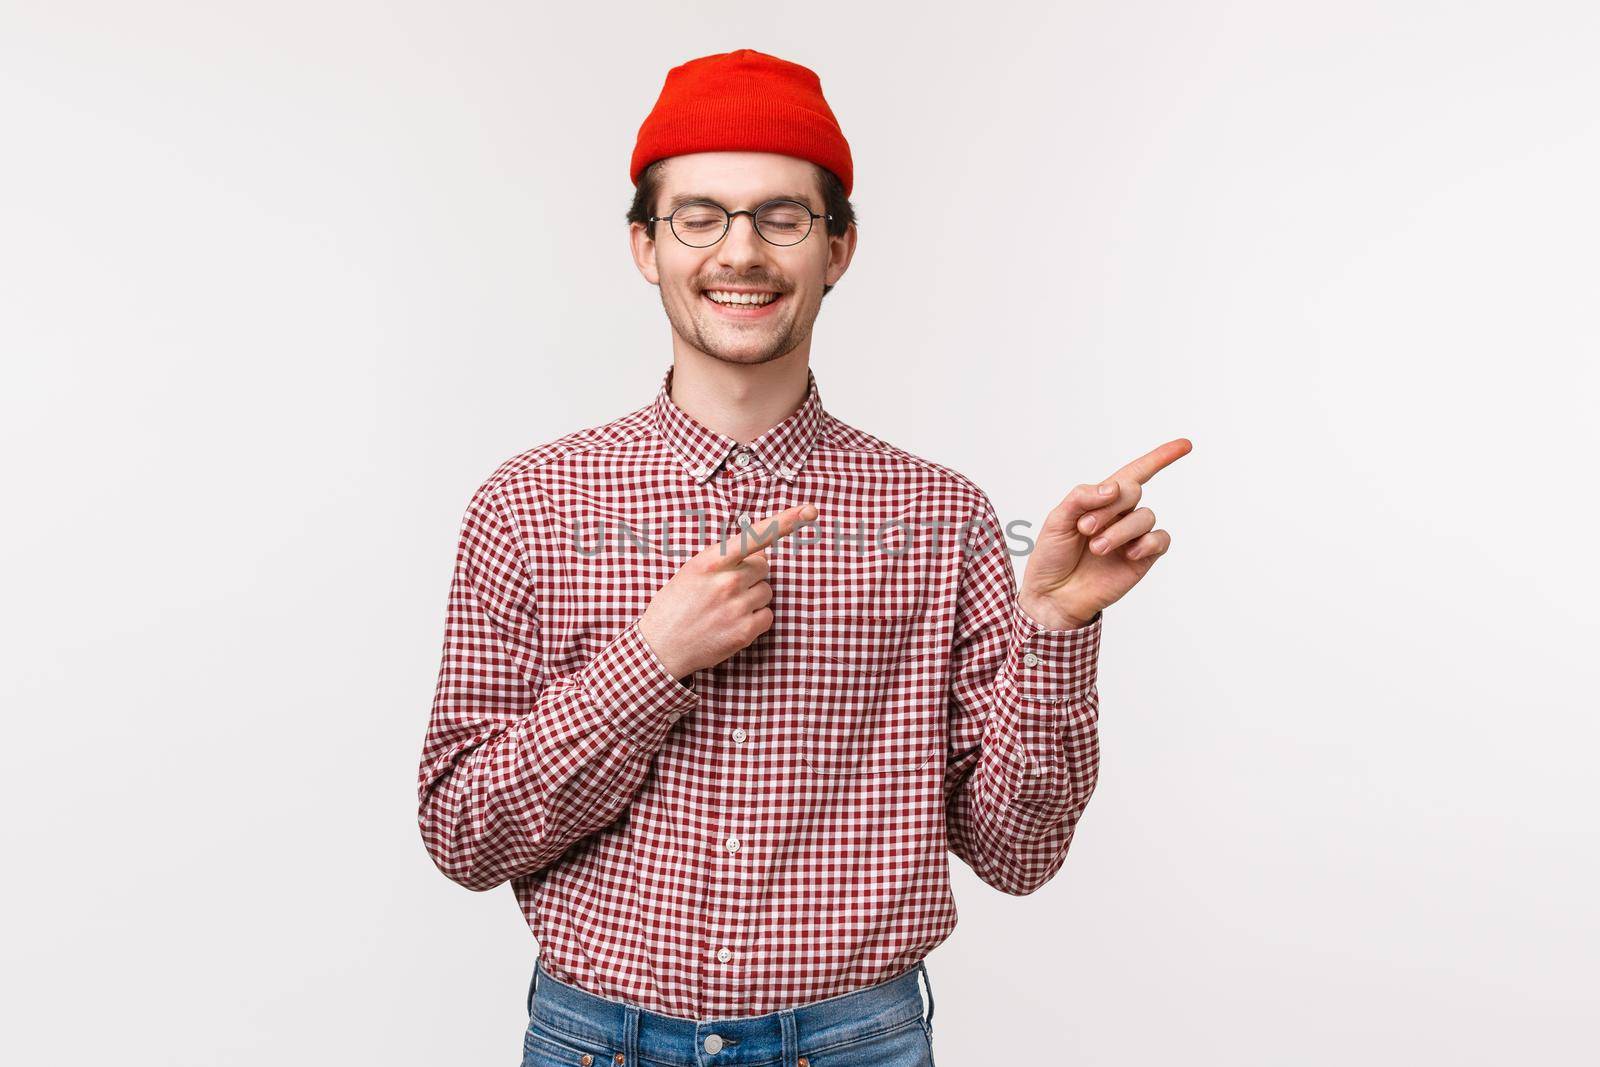 Waist-up portrait of happy, cheerful dreamy adult man with moustache, in red beanie and glasses, smiling with closed eyes as cheering found what he was looking for at upper right corner advertisement.